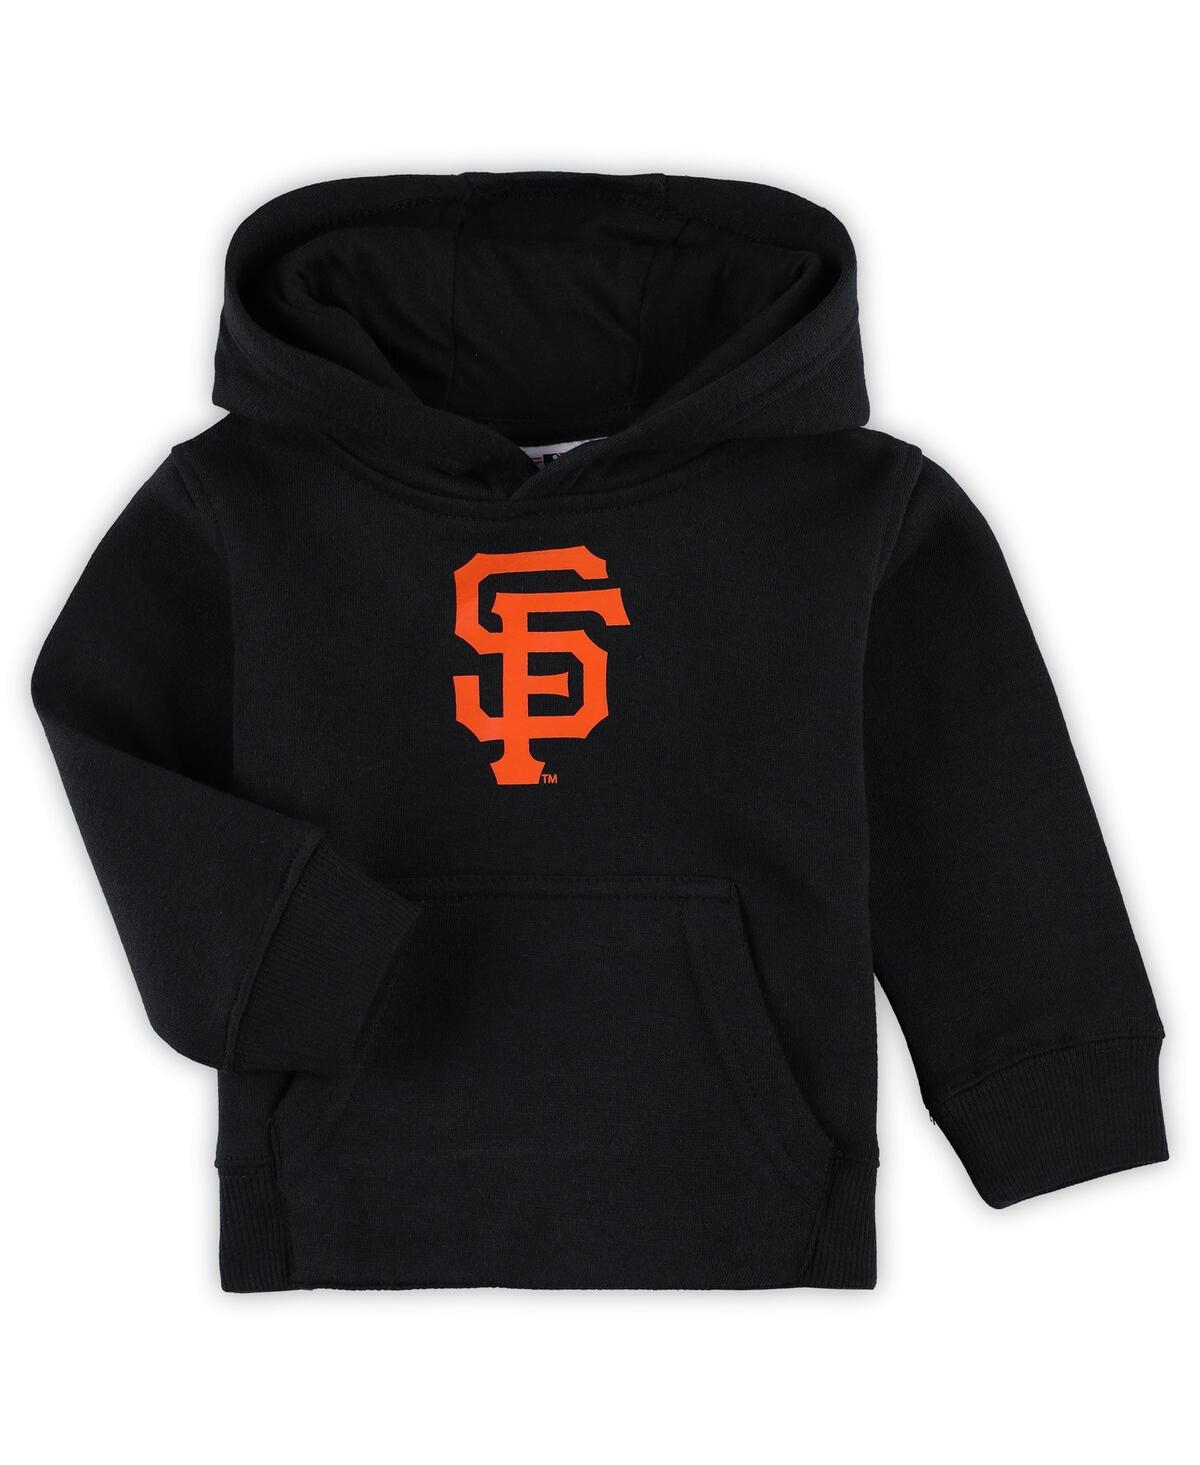 Outerstuff Babies' Toddler Boys And Girls Black San Francisco Giants Team Primary Logo Fleece Pullover Hoodie